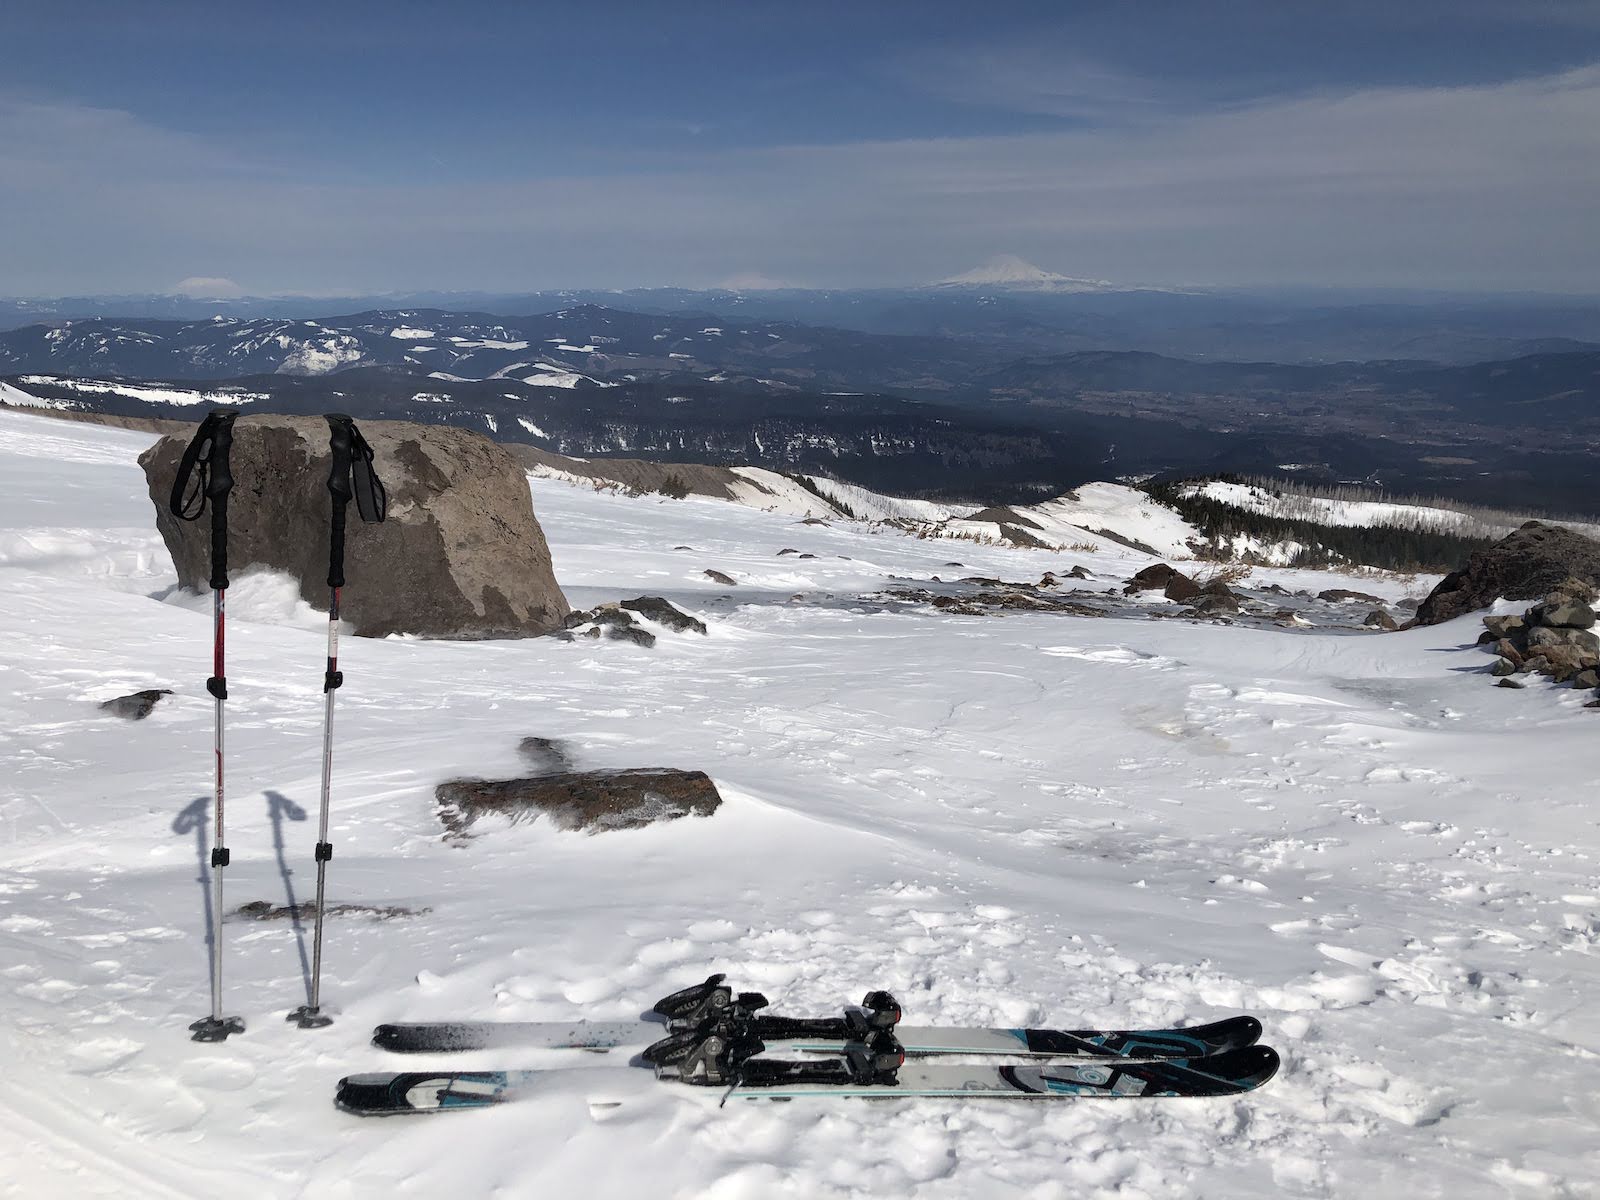 skis sit next to a pair of ski poles standing in the snow looking down from the Cooper Spur Shelter on Mt Hood towards Mt Adams